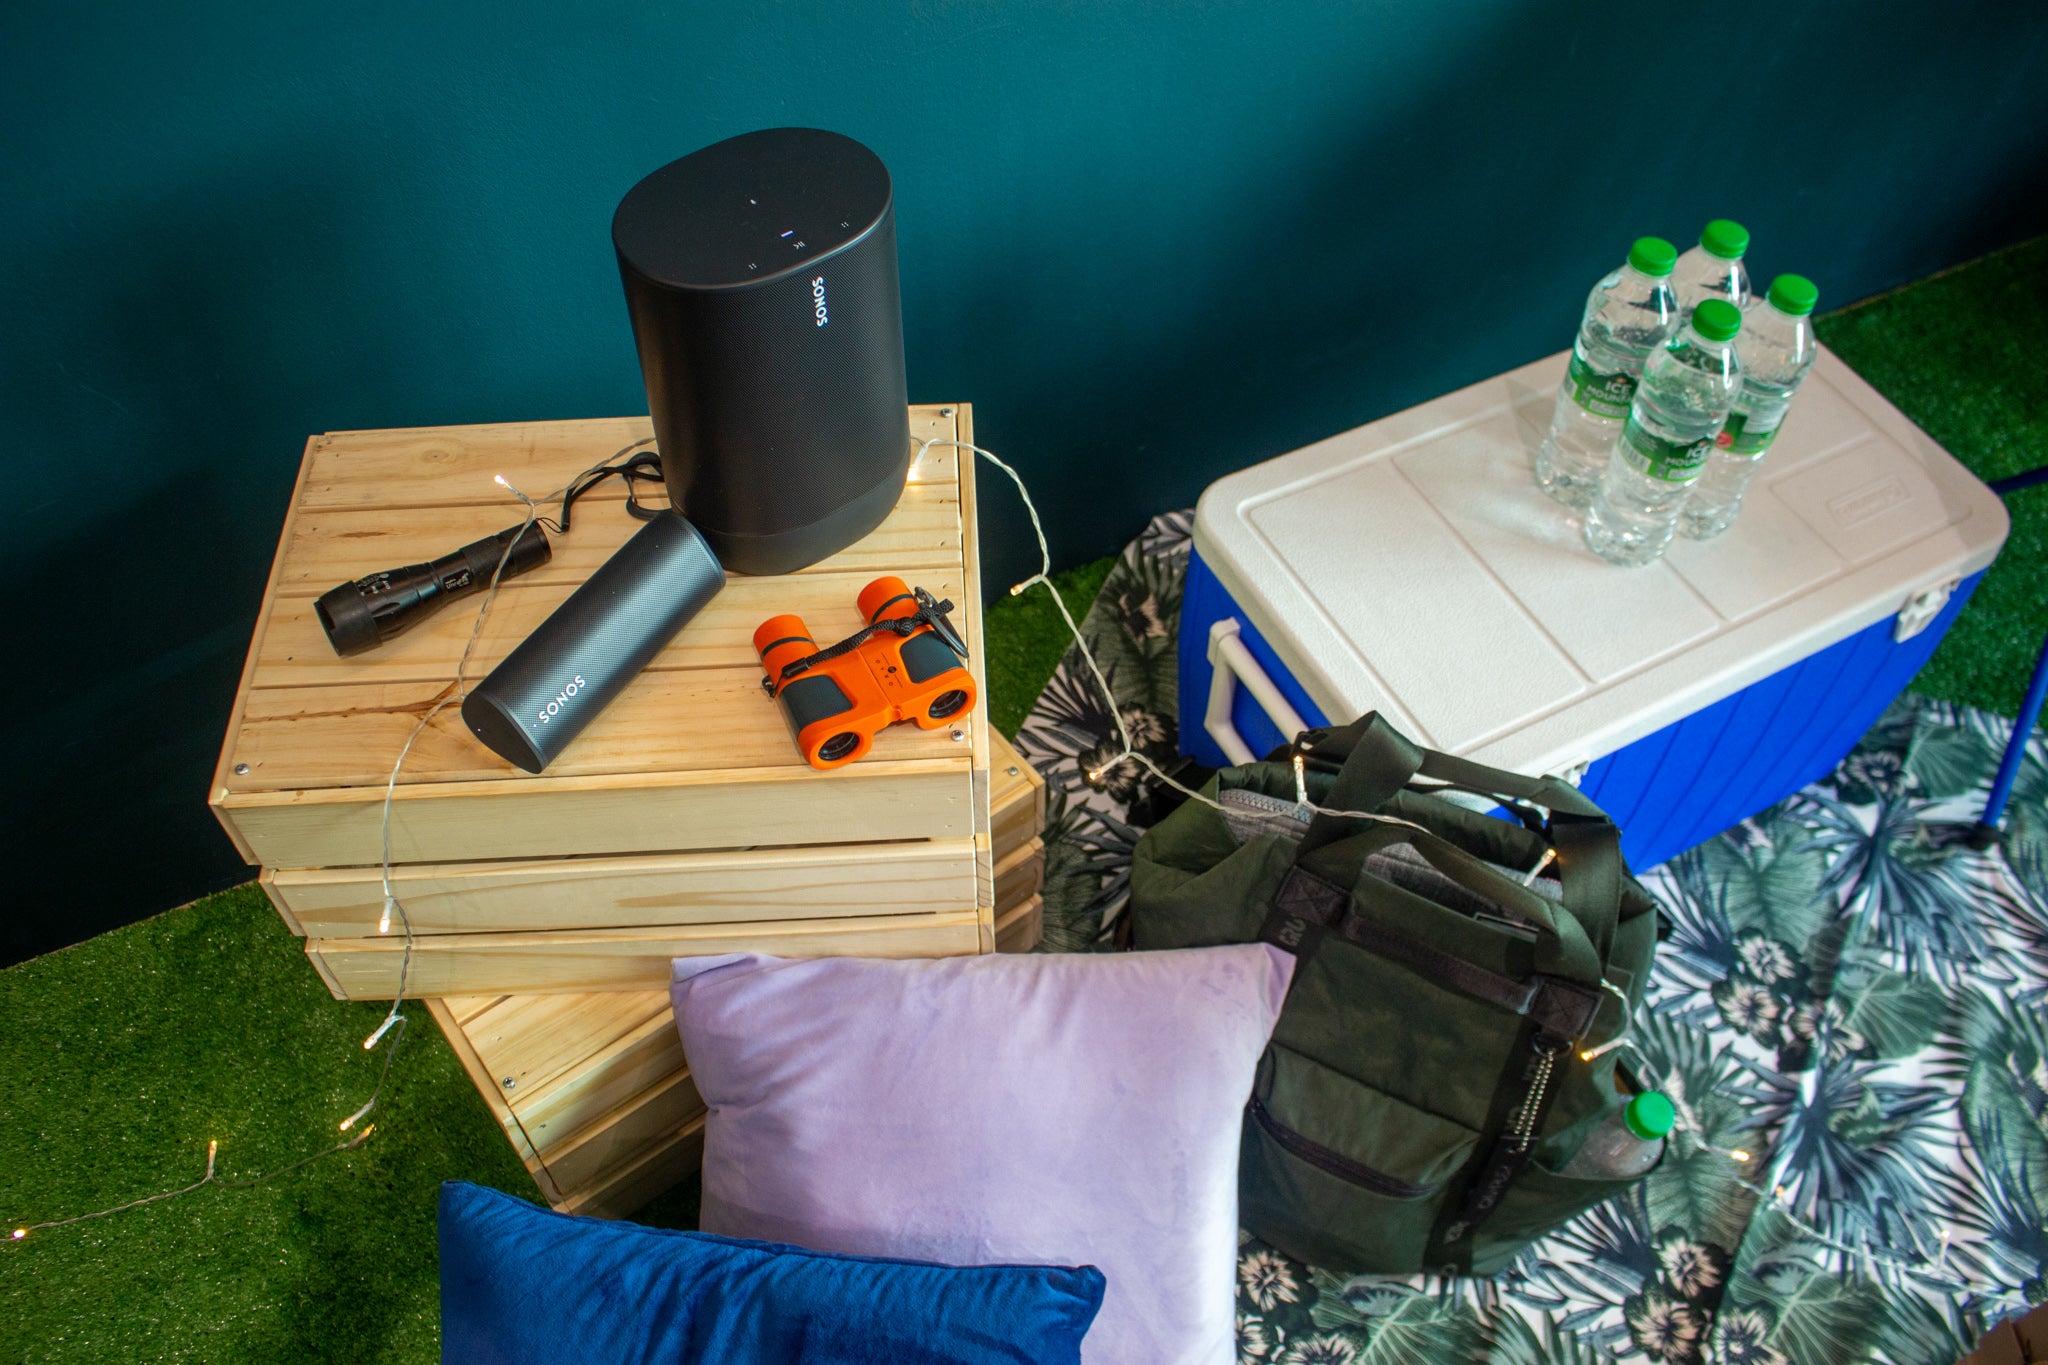 Sonos Roam Demonstration Listening Event (Pre-Launch): Durability and ruggedness